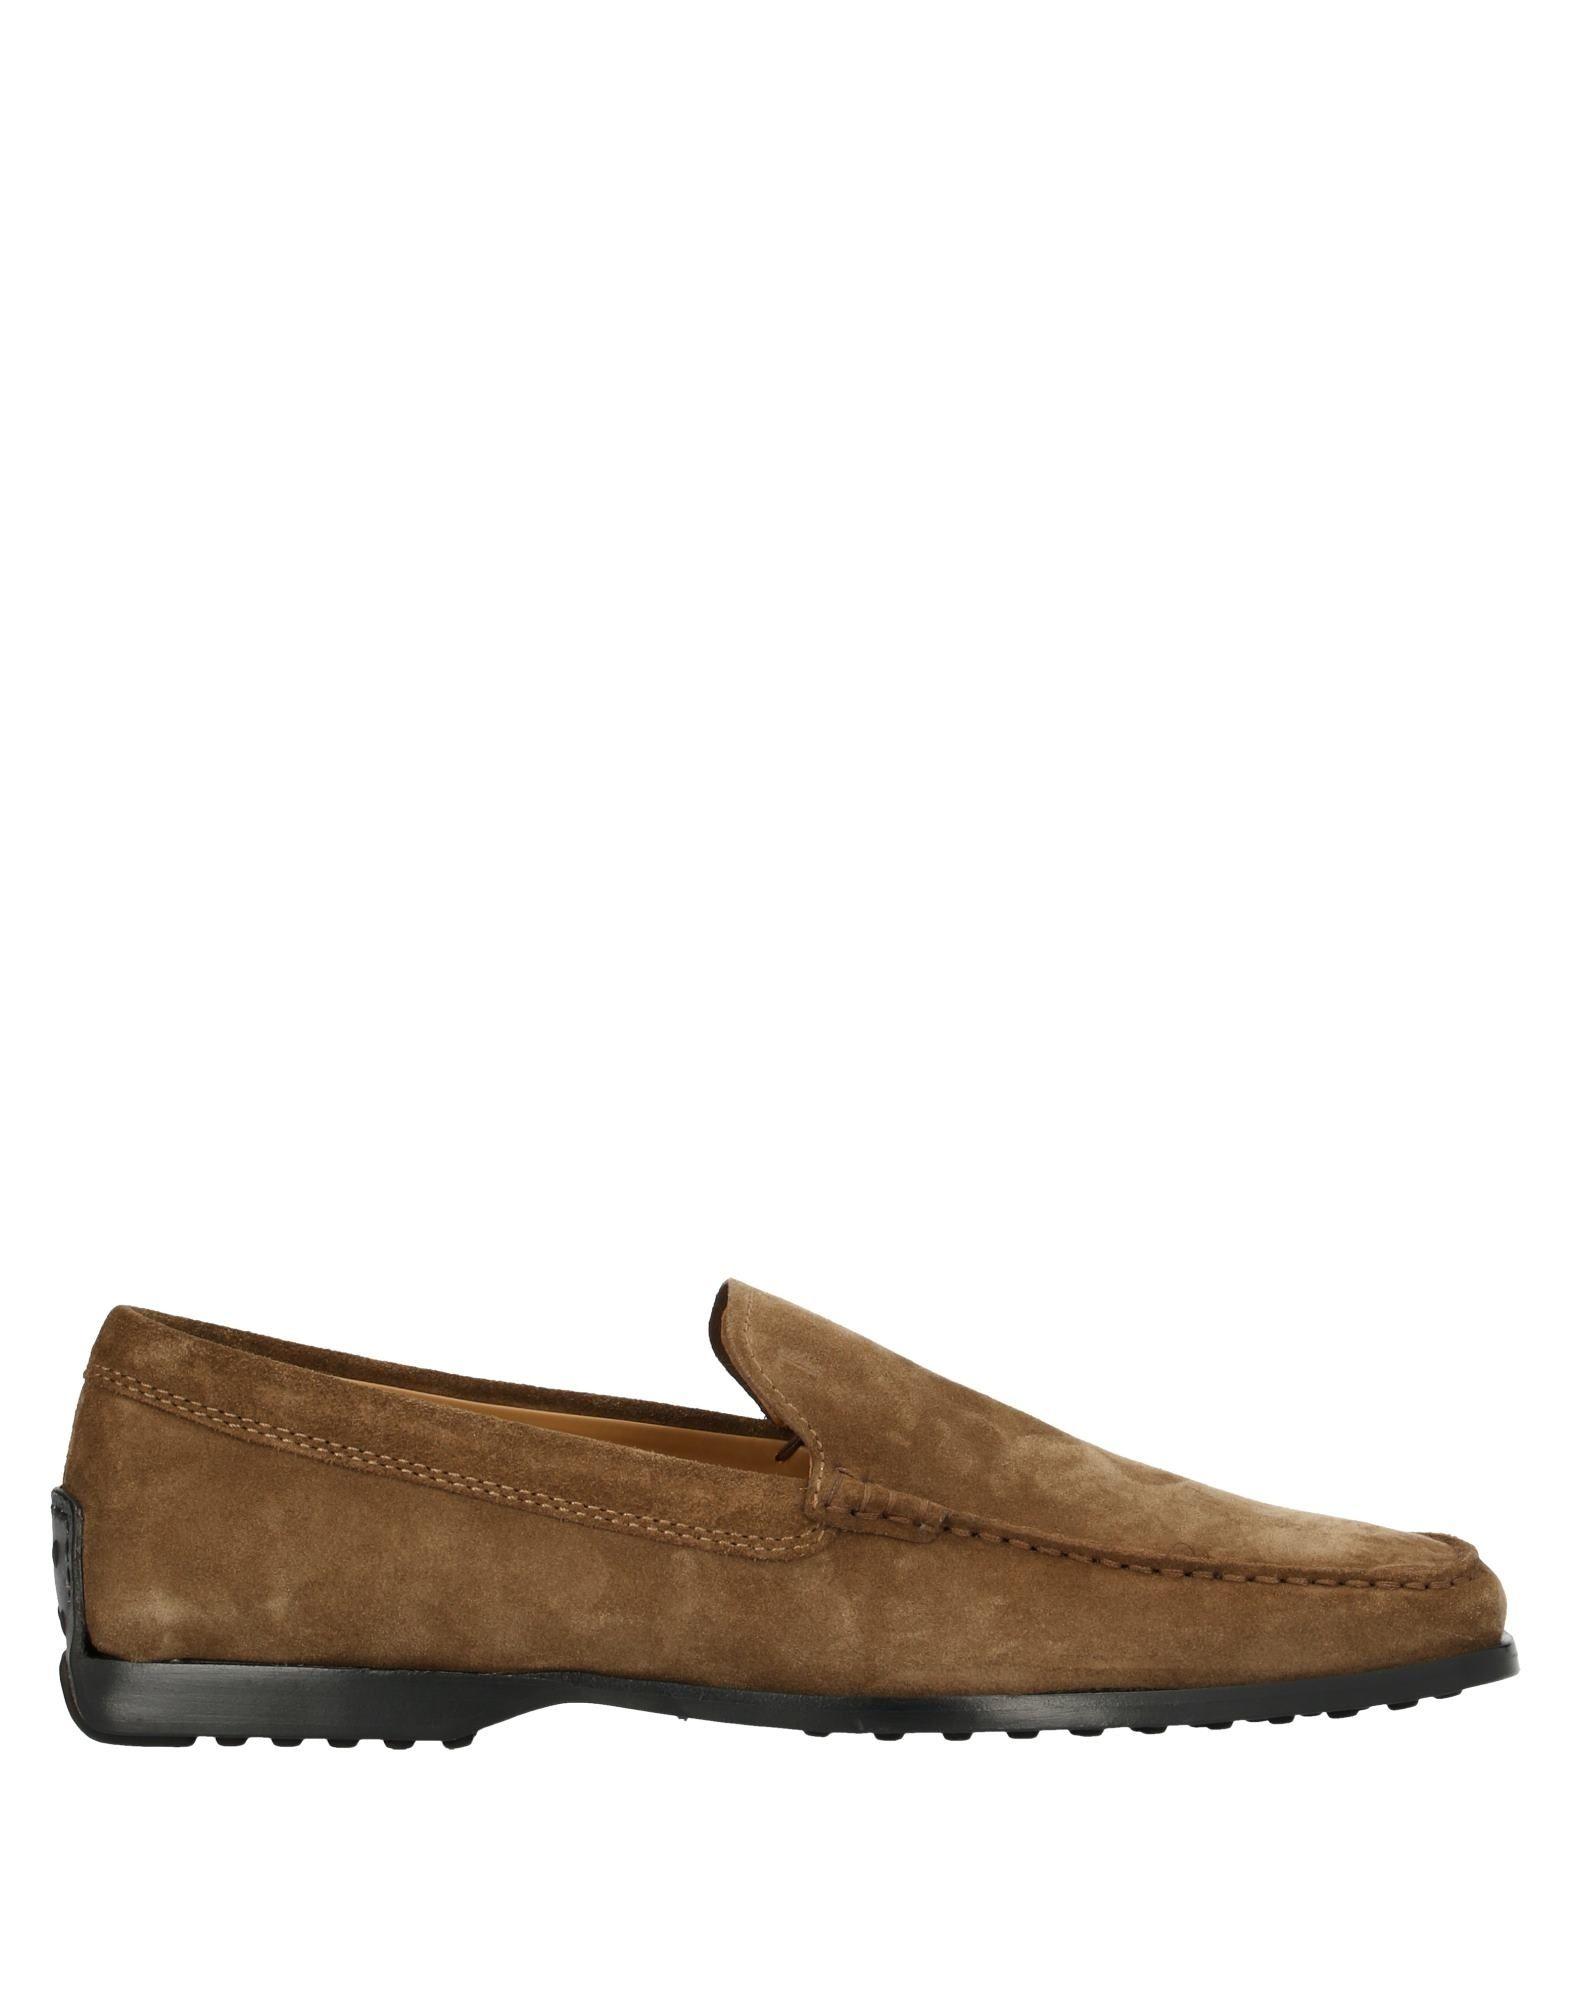 Tod's Leather Loafer in Brown for Men - Lyst